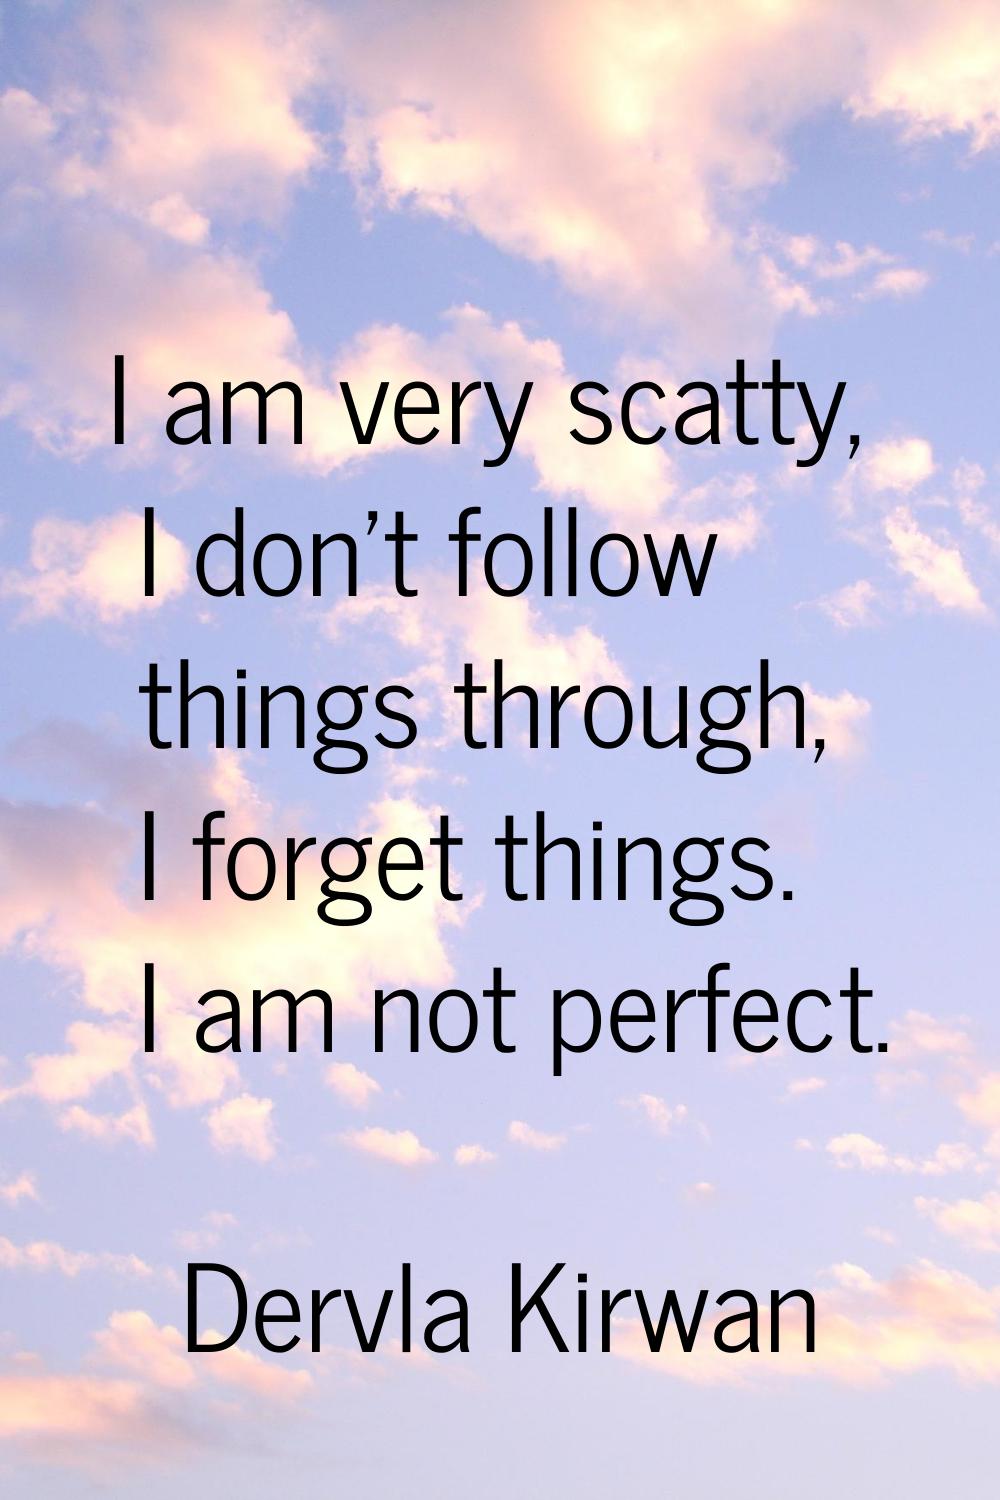 I am very scatty, I don't follow things through, I forget things. I am not perfect.